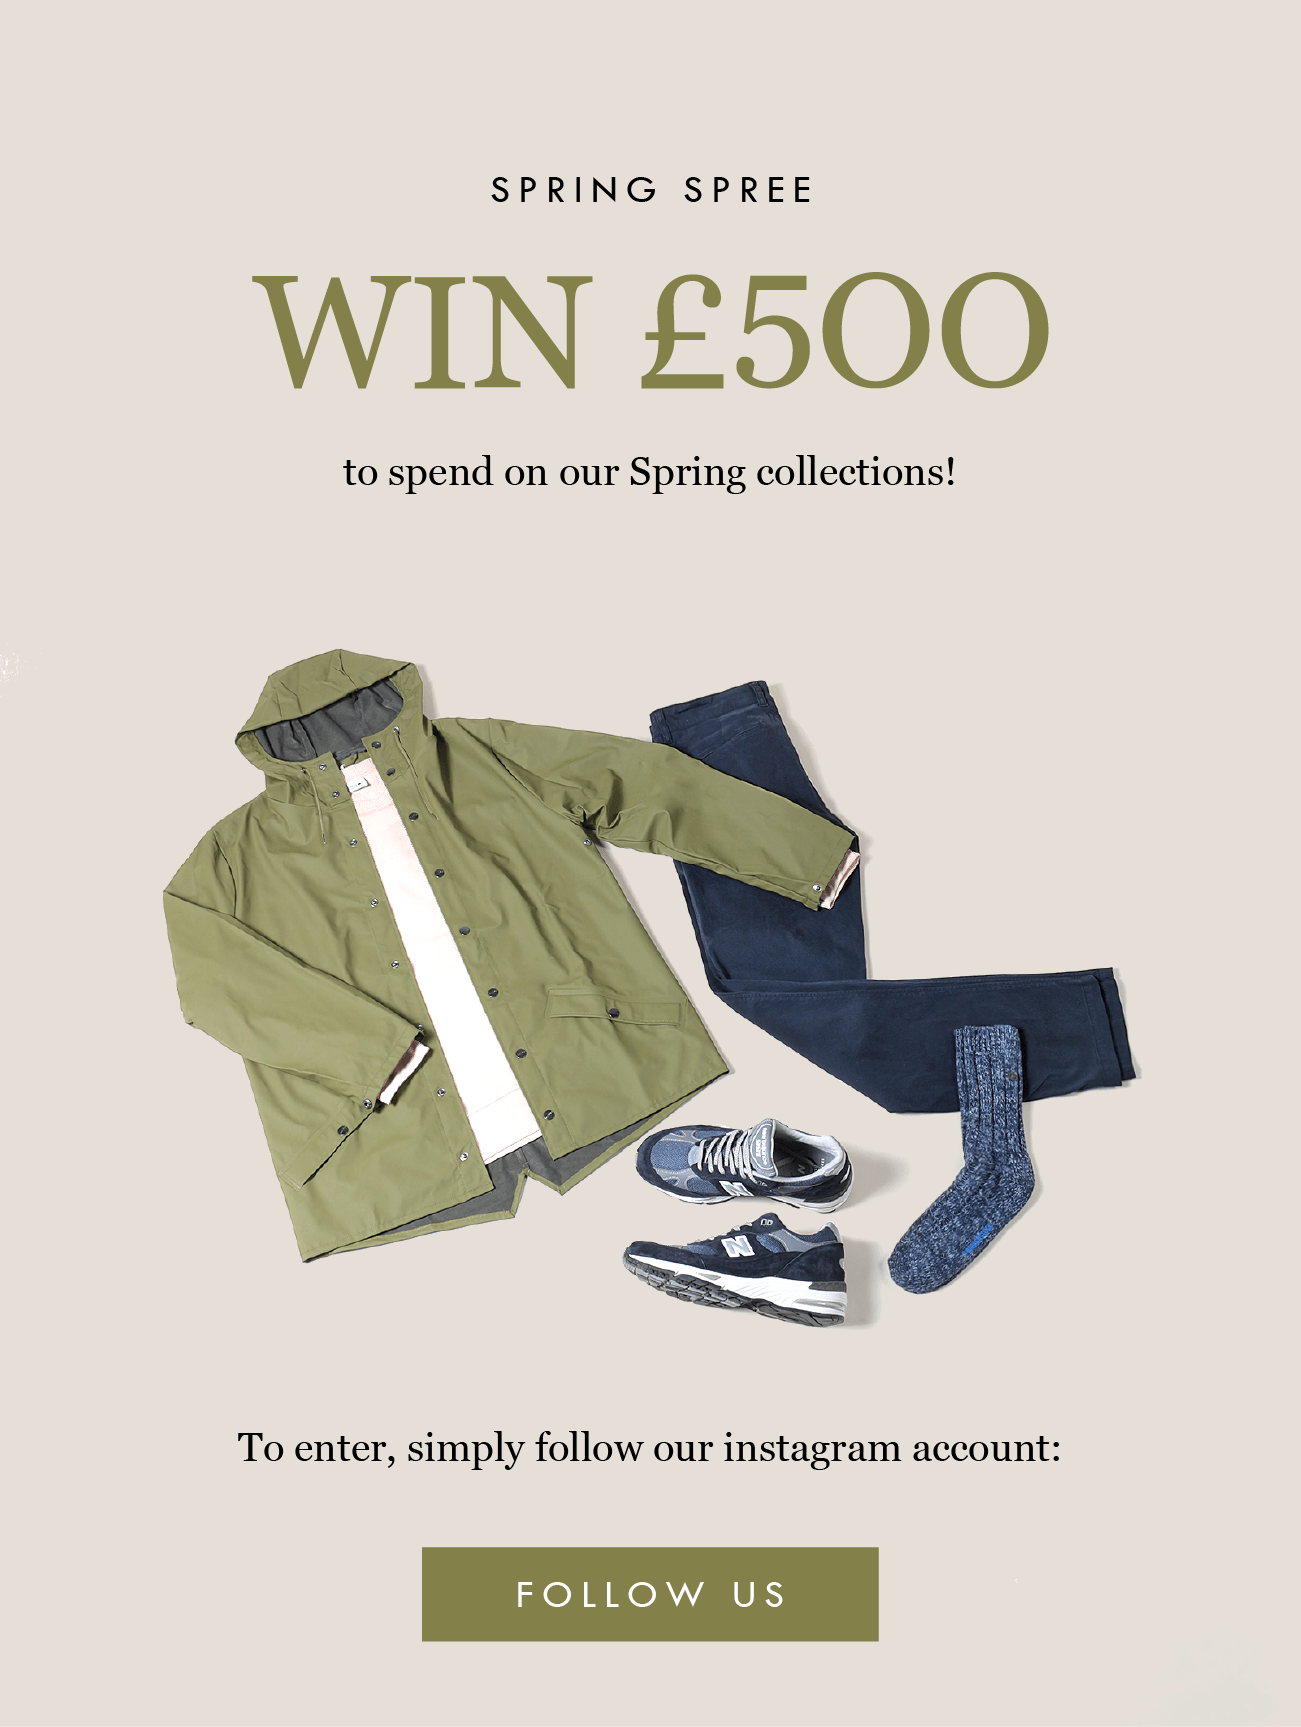 SPRING SPREE - Win ?500 to spend on our Spring collections!
To enter, simply follow our instagram account: Follow us